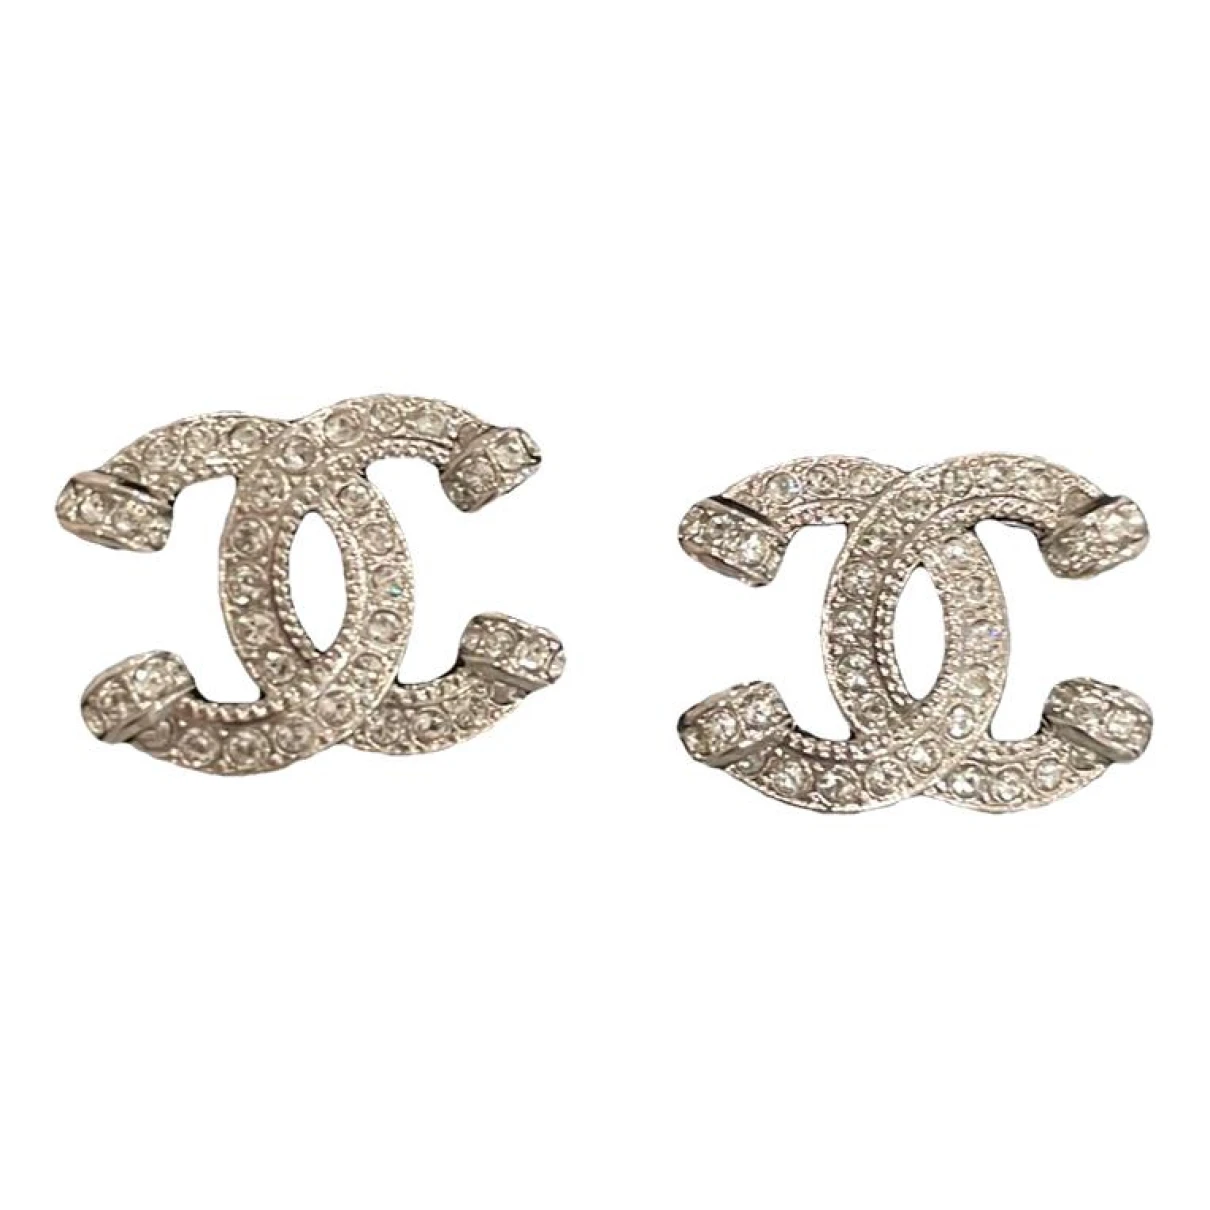 jewellery Chanel earrings CC for Female Metal. Used condition